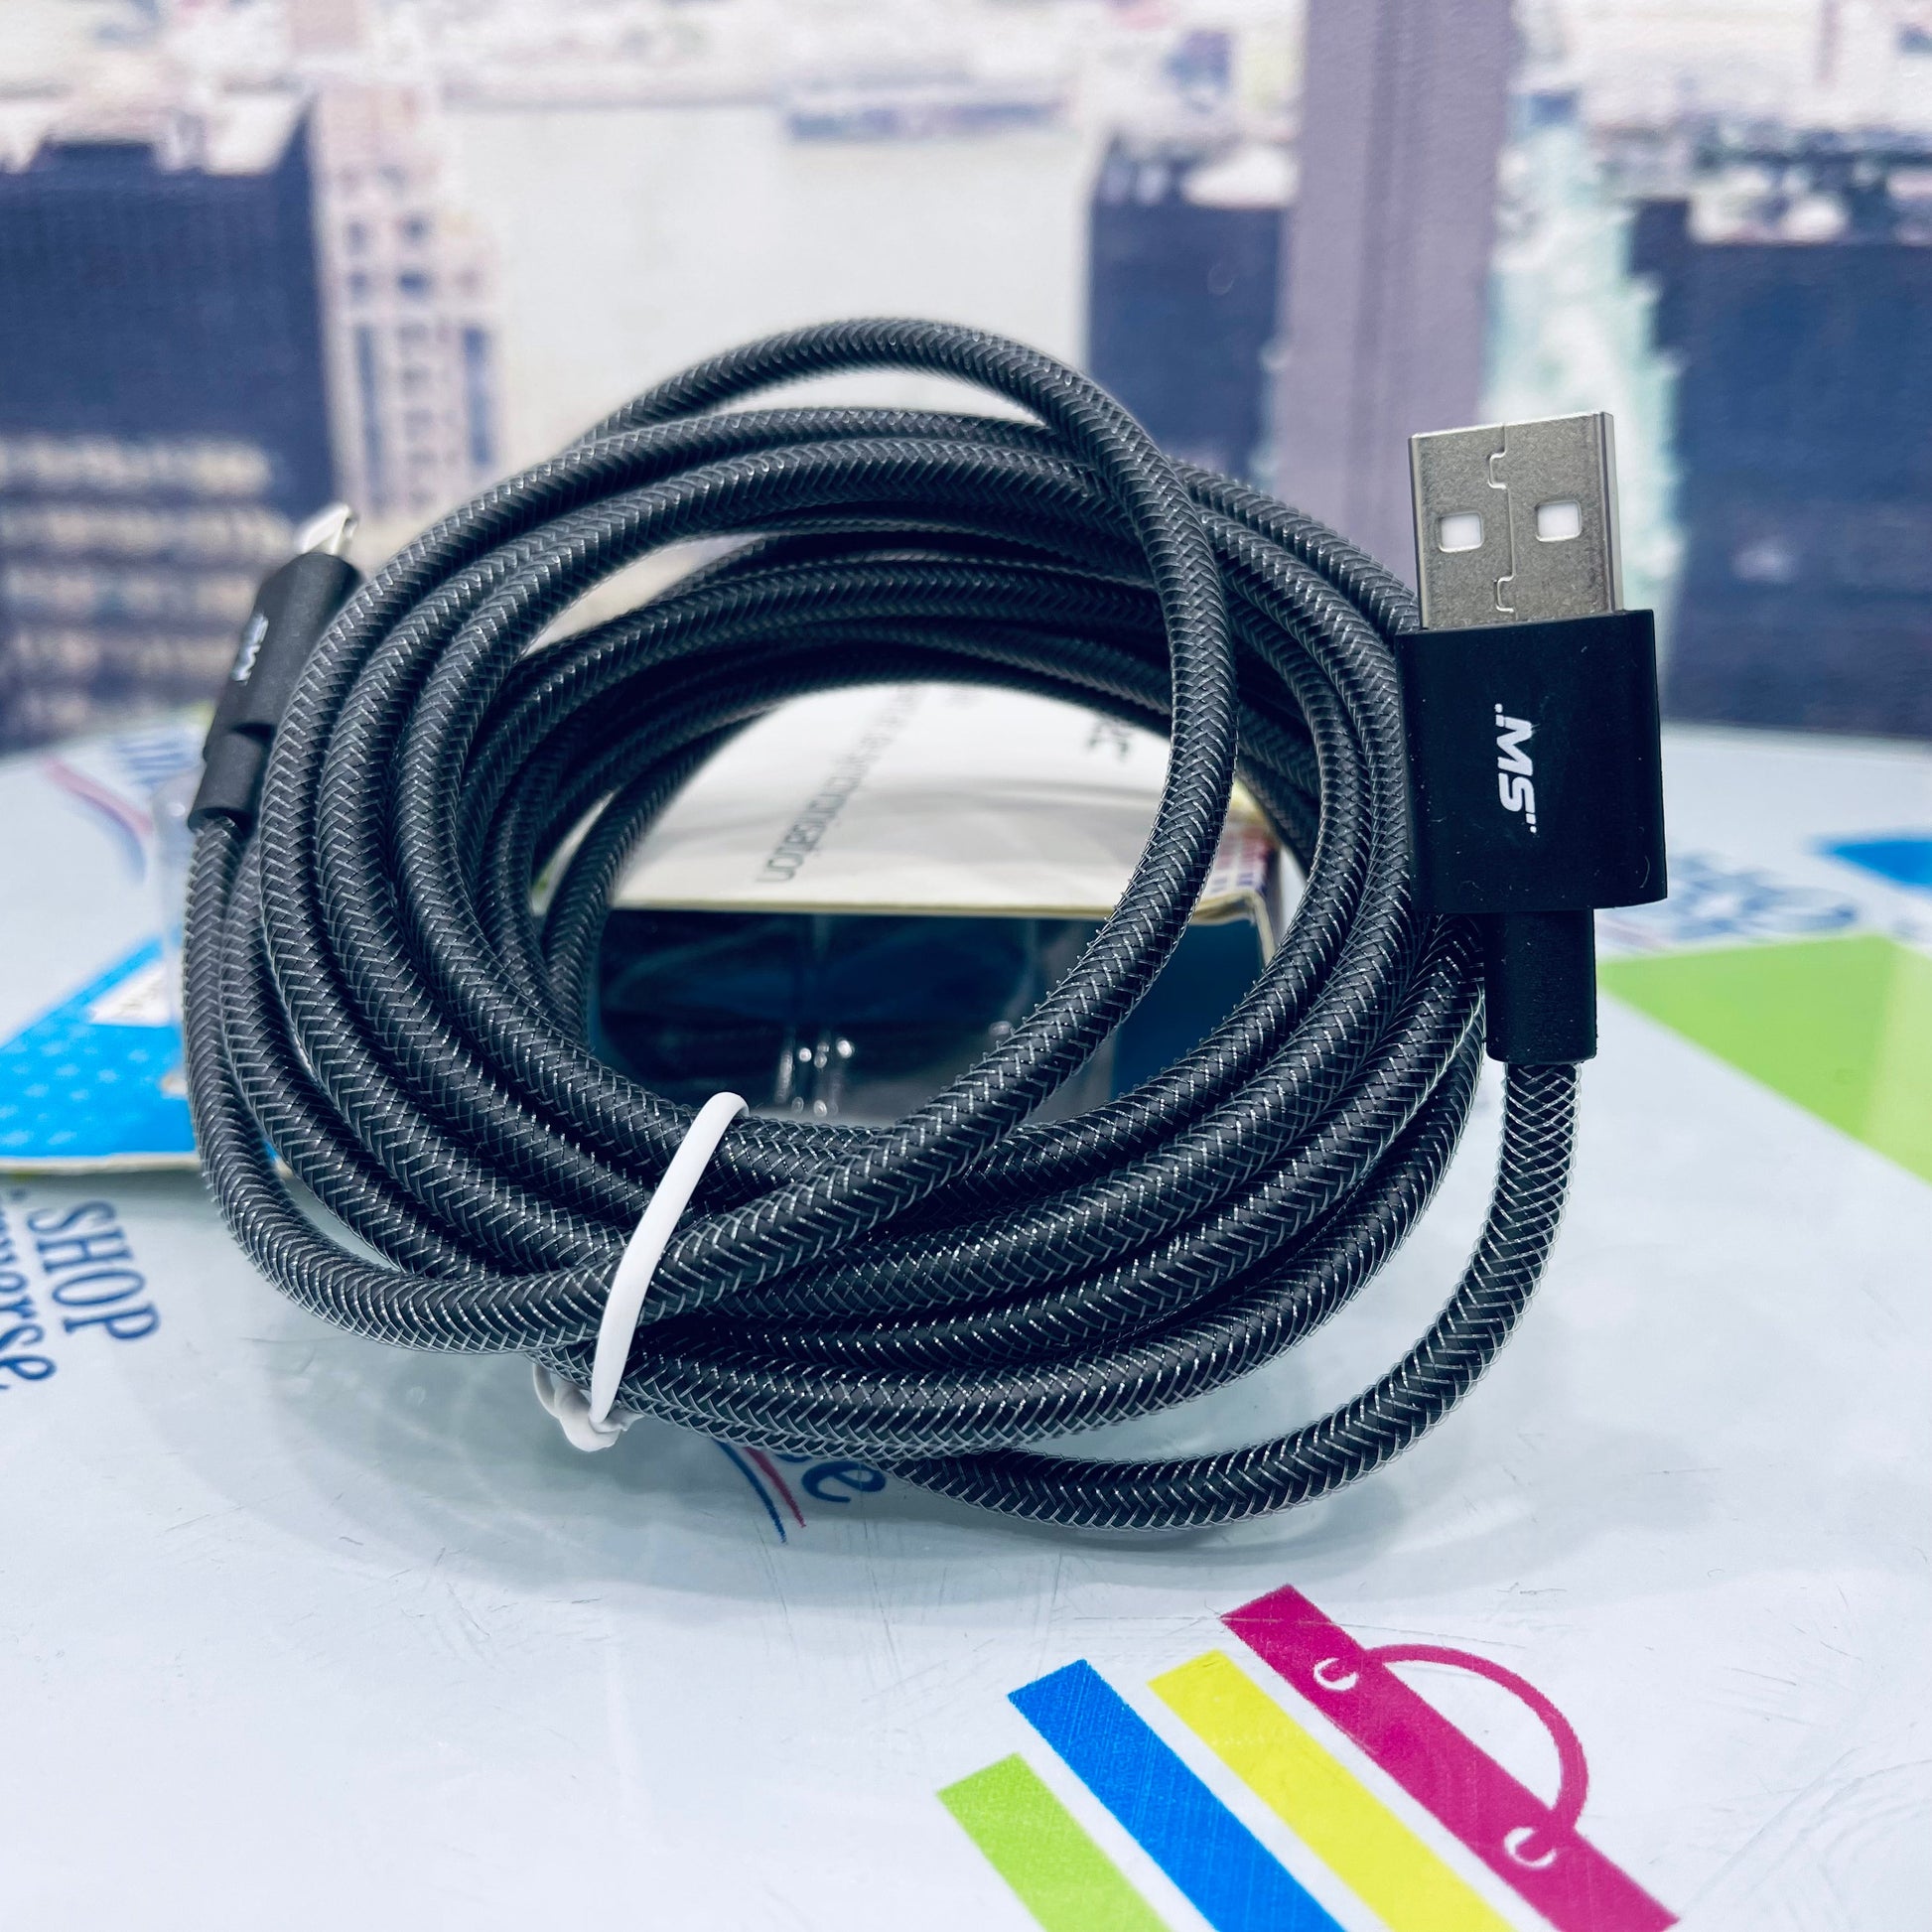 MobileSpec 9" Metallic Charge & Sync Cable SHOPINVERSE